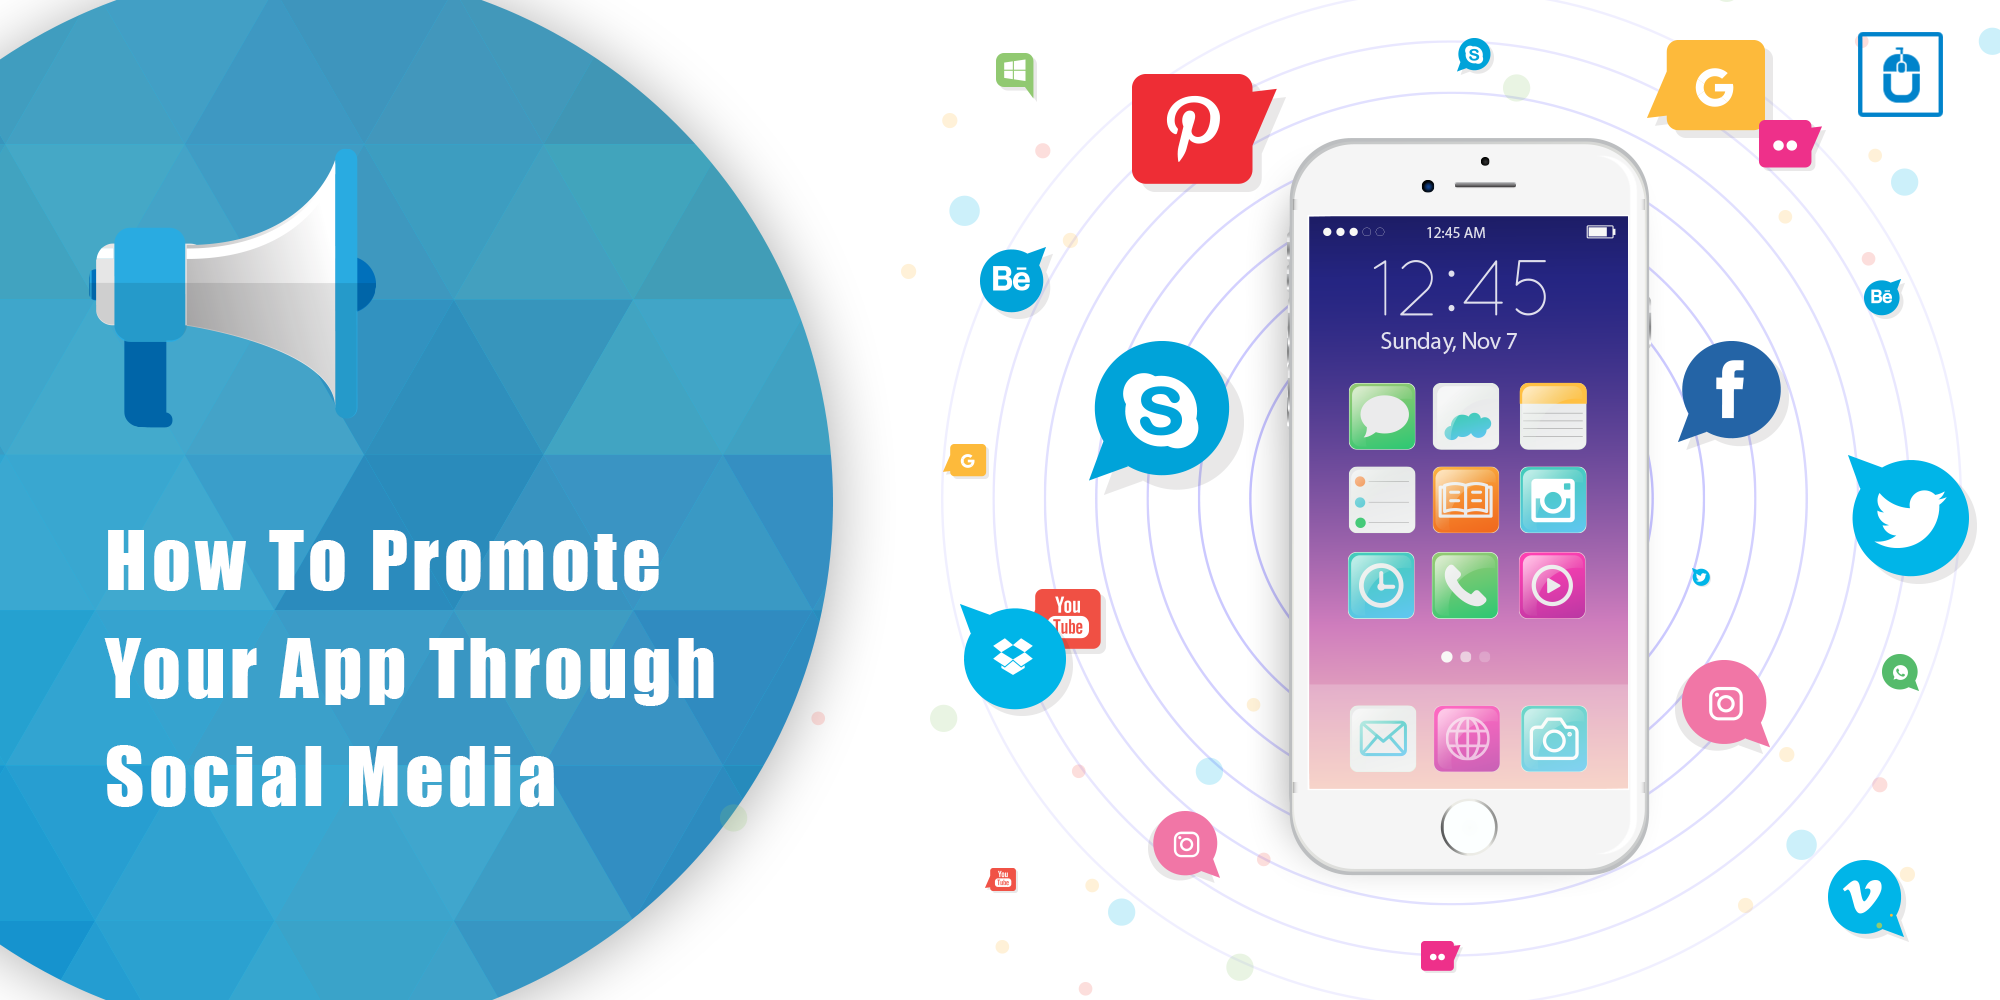 How To Promote Your App Through Social Media